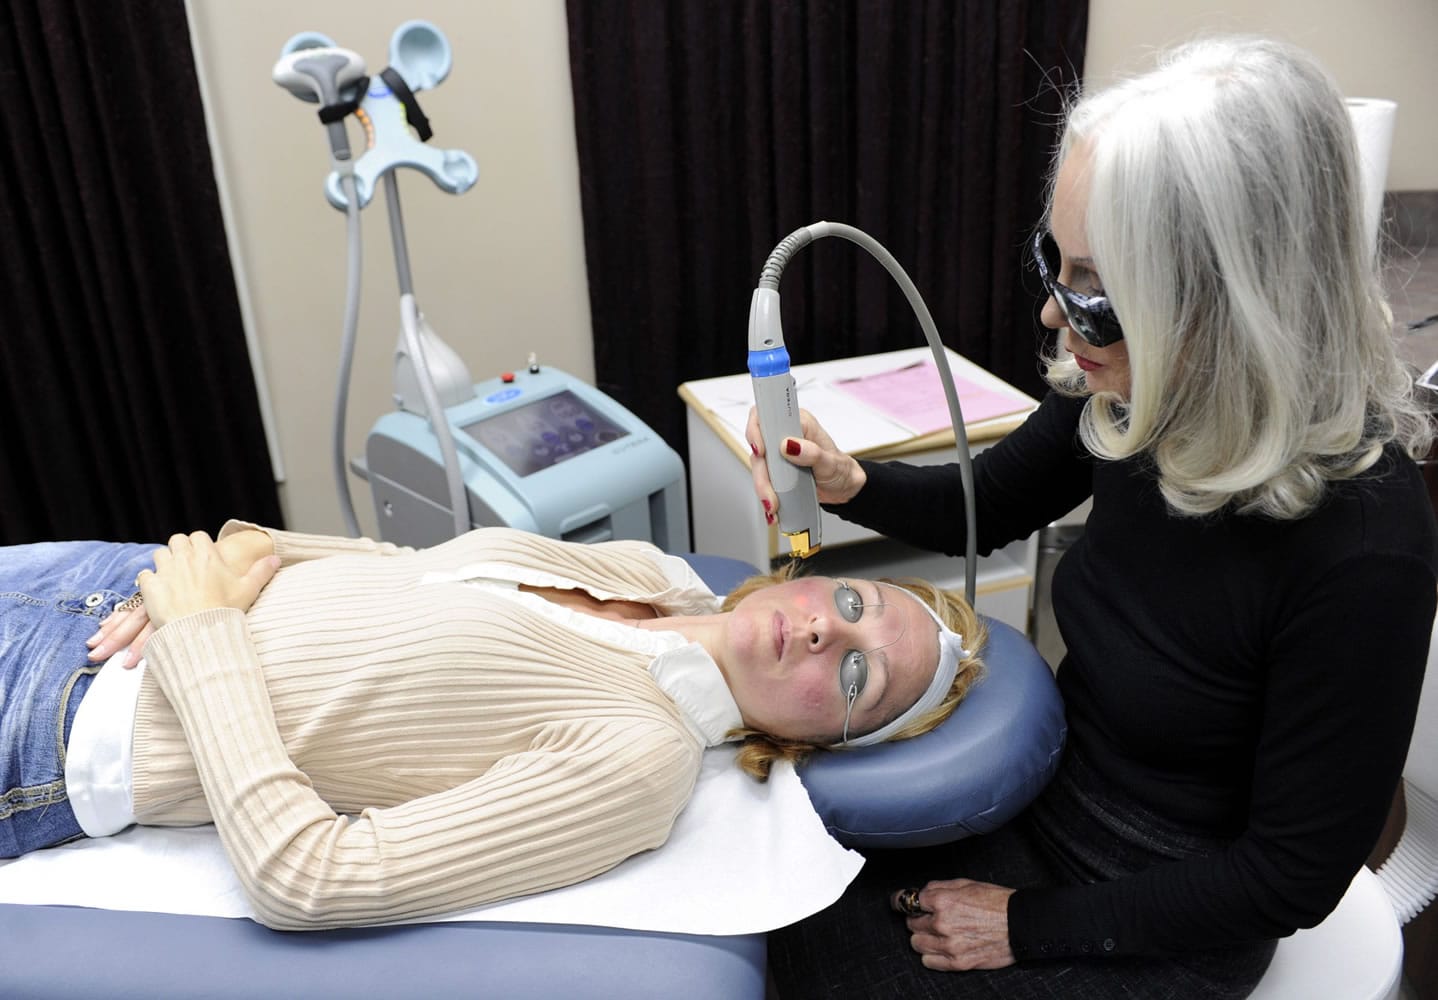 Vancouver Laser Skin Care Clinic has been open in Vancouver since 2005.